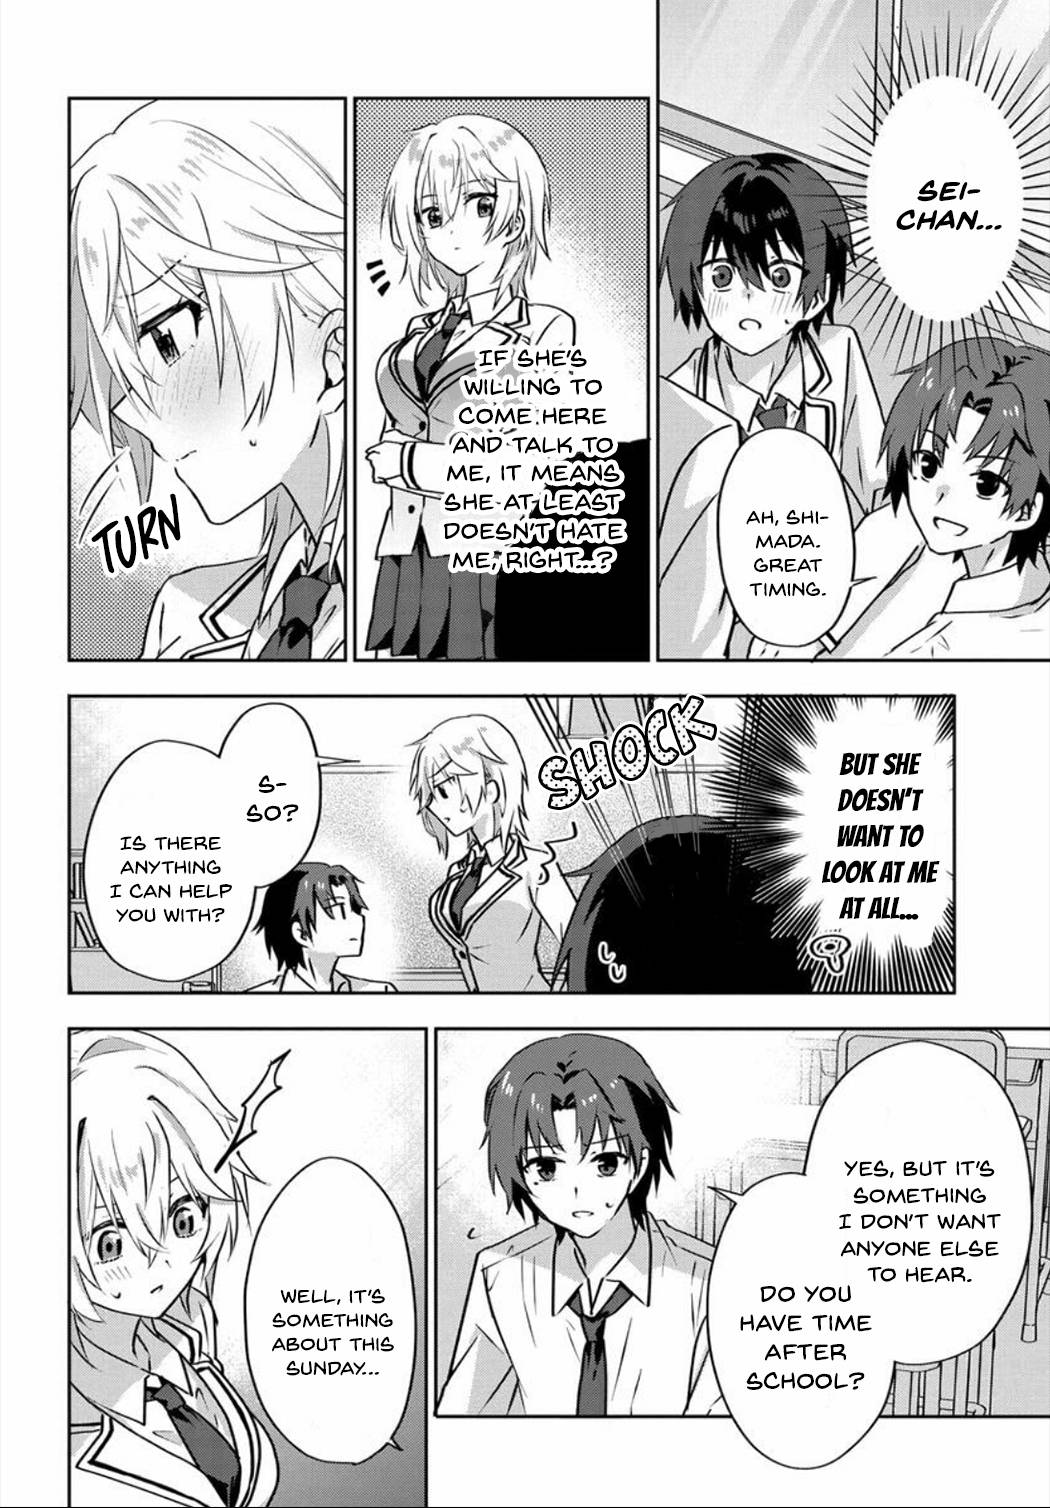 Since I’Ve Entered The World Of Romantic Comedy Manga, I’Ll Do My Best To Make The Losing Heroine Happy - chapter 3.2 - #5